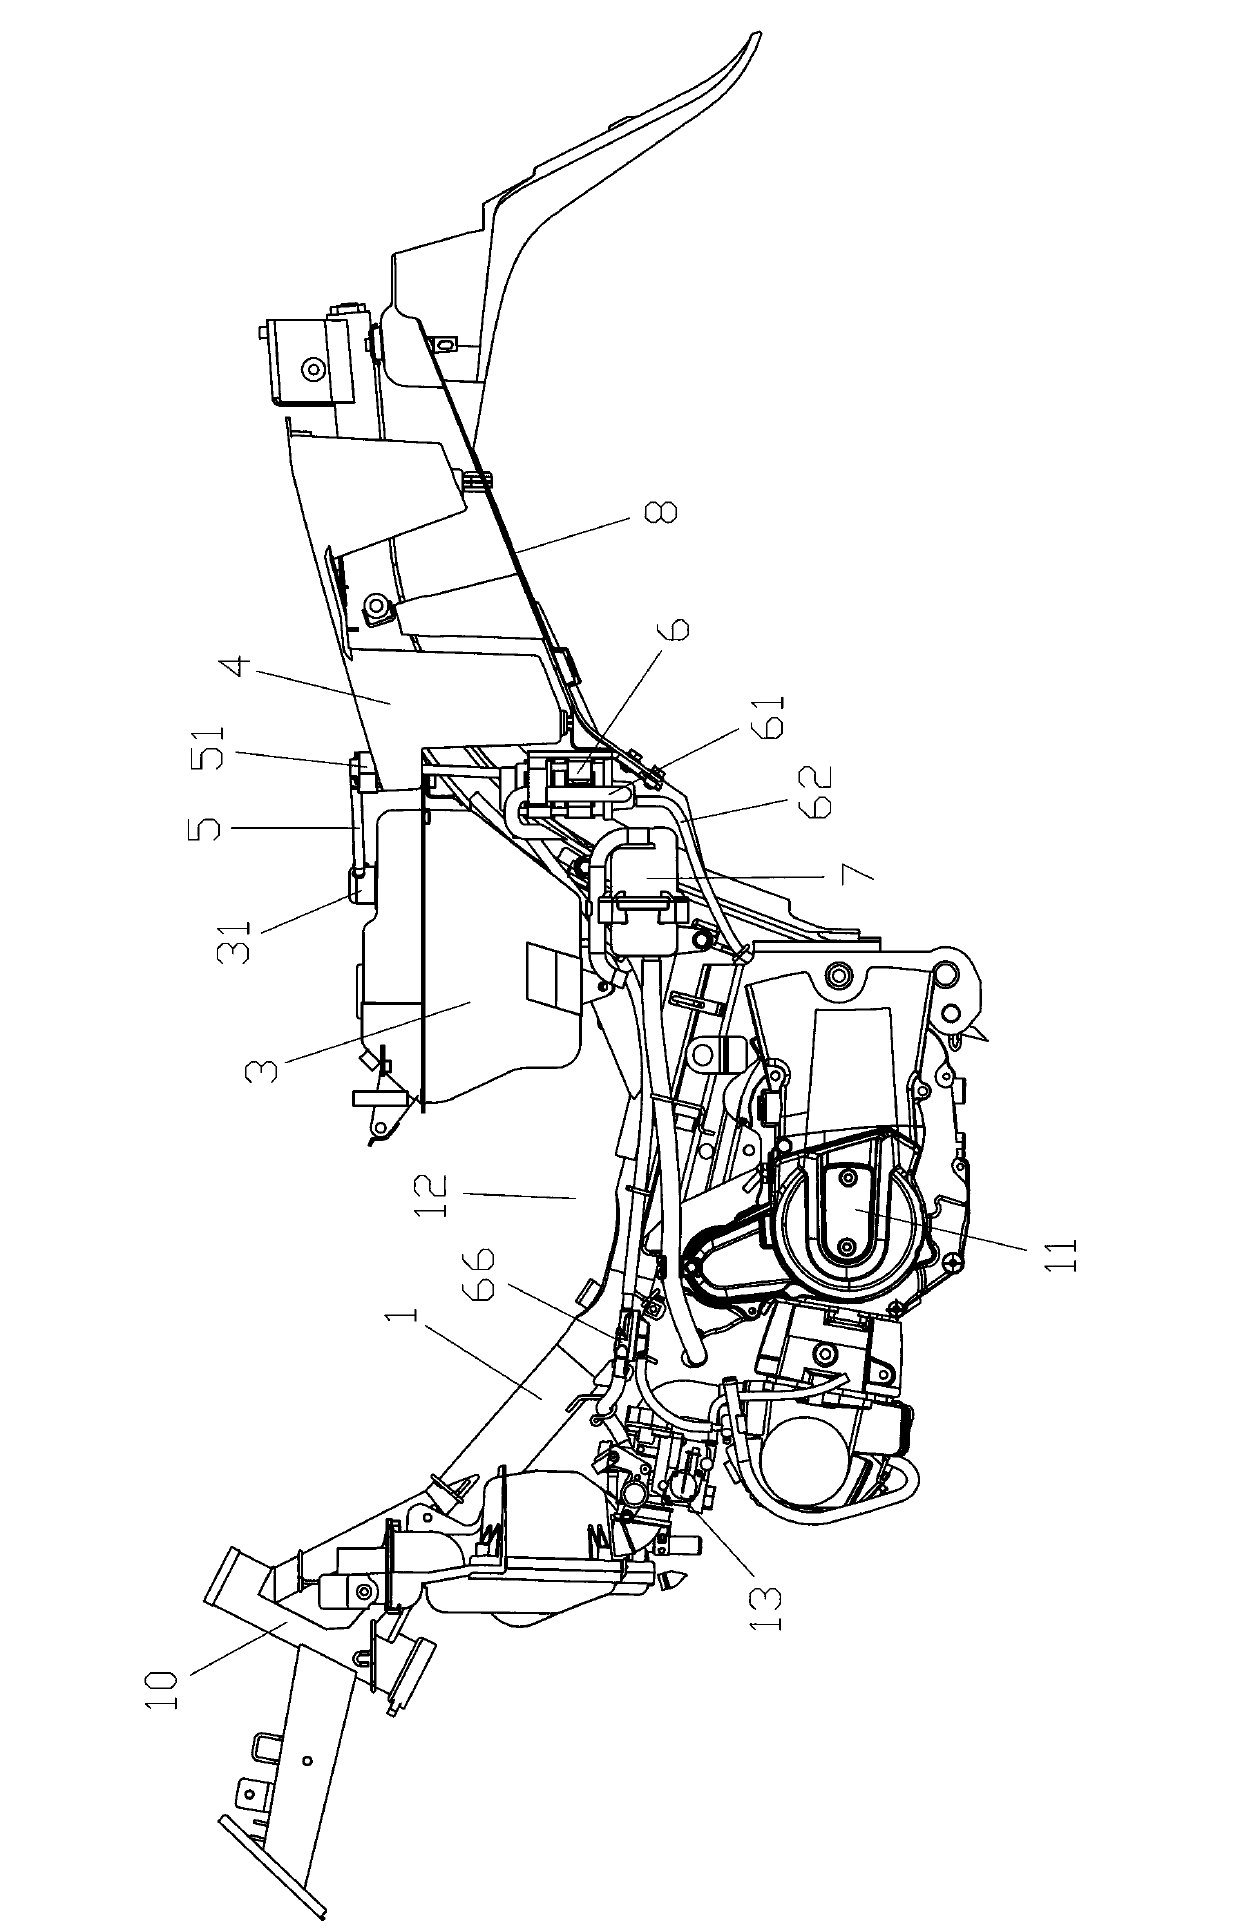 Fuel evaporation configuration structure of straddle type motorized cart